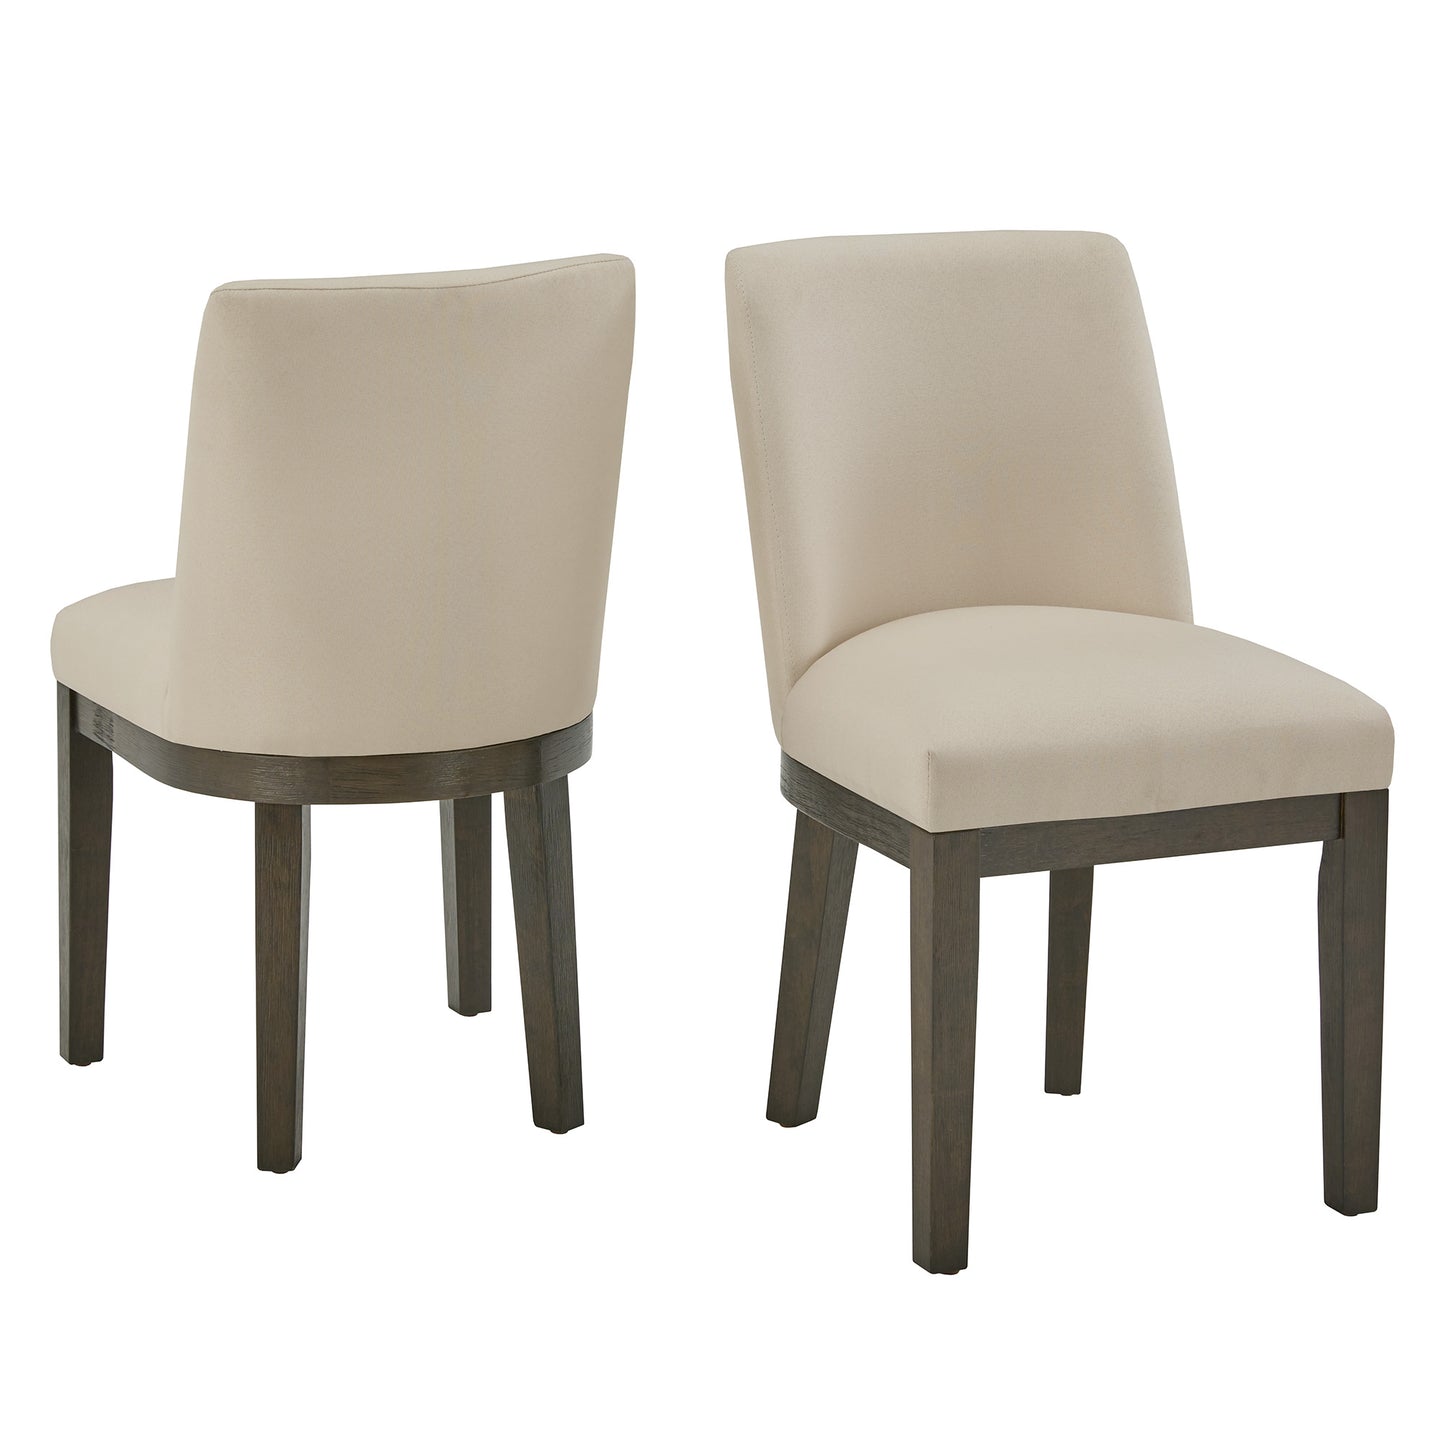 Weathered Grey Finish Fabric Dining Chair (Set of 2) - Beige Linen, Curved Back